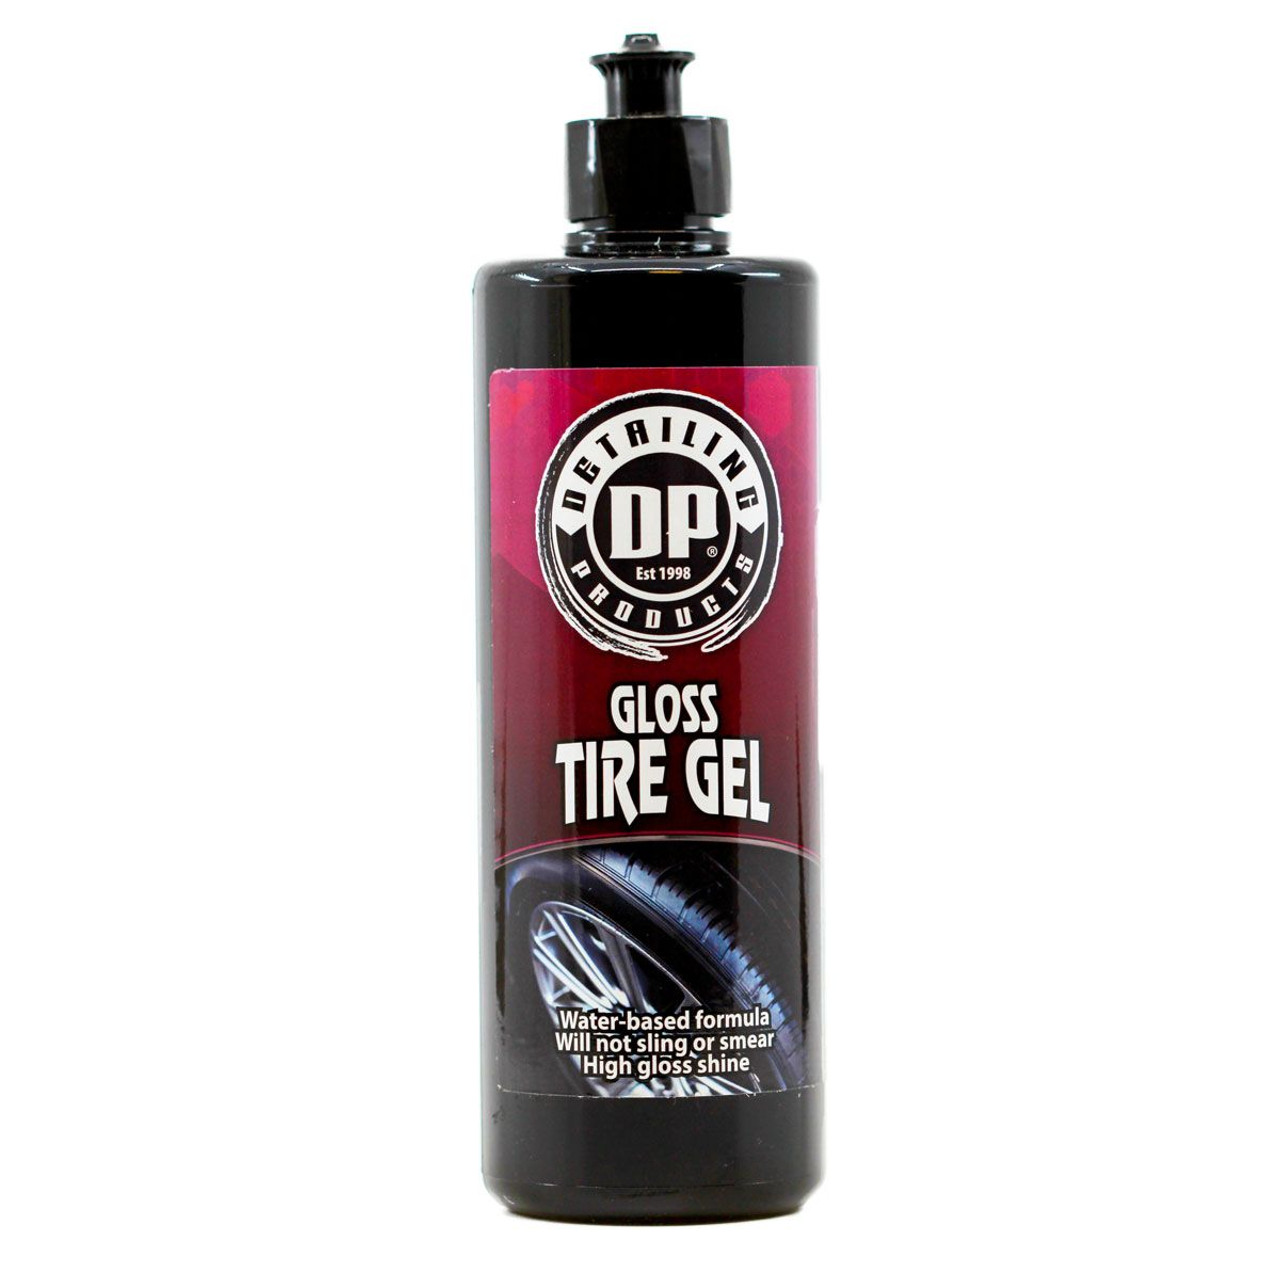 3D Speed Dressing 1 Gallon  High Gloss Rubber and Tire Shine